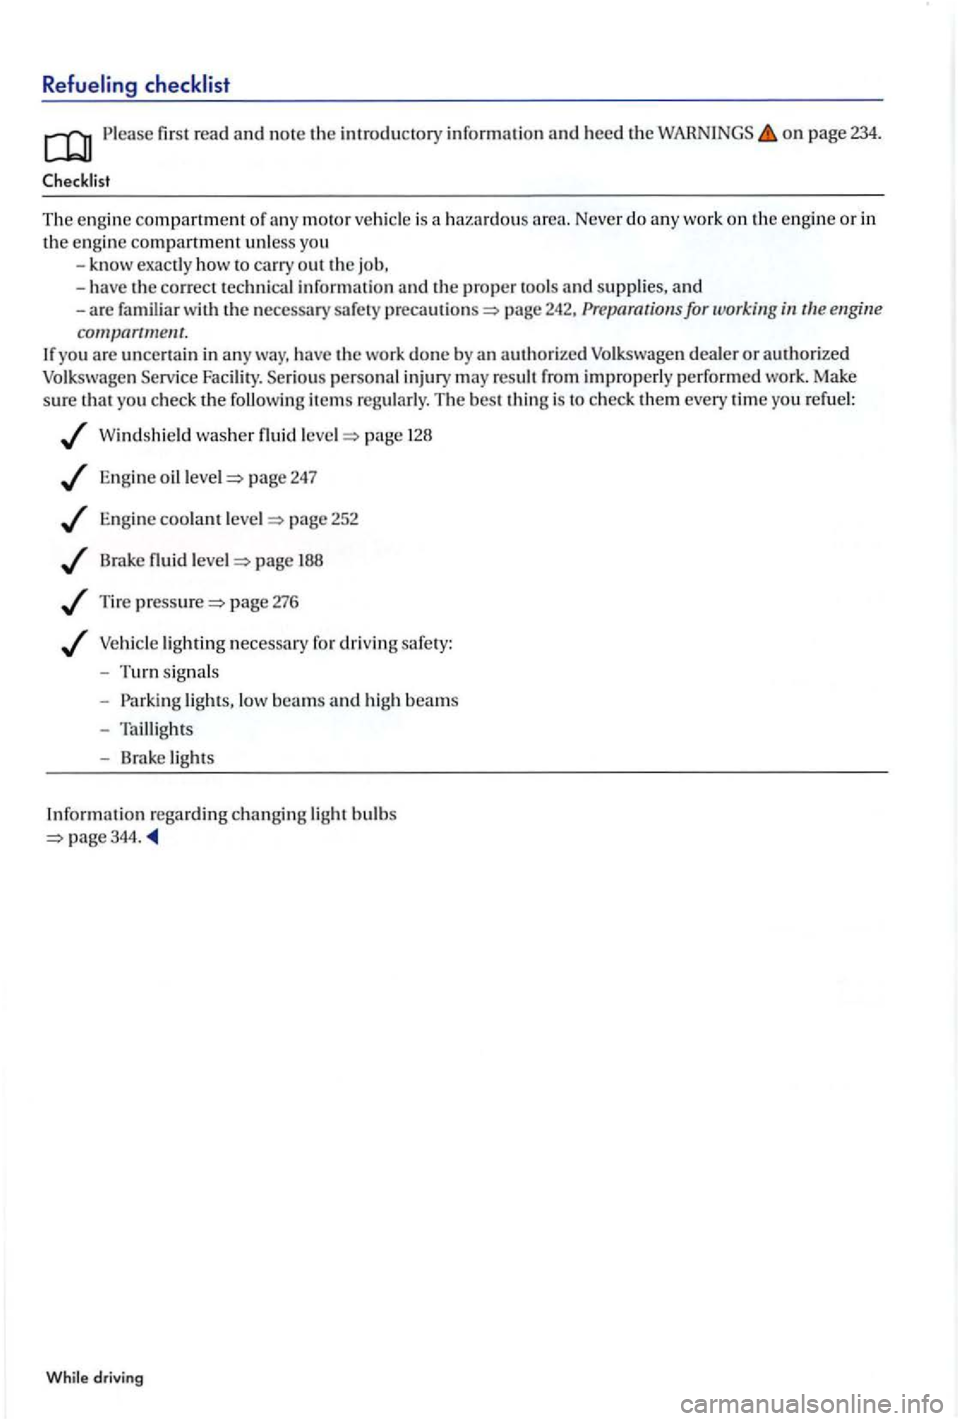 VOLKSWAGEN GOLF PLUS 2007  Owners Manual Refueling checklist 
first  rea d an d note the introductory information and heed the on page  234. 
The  engi ne compartment of moto r vehicle  is  a  haza rdous engine or in the engin e compartment 